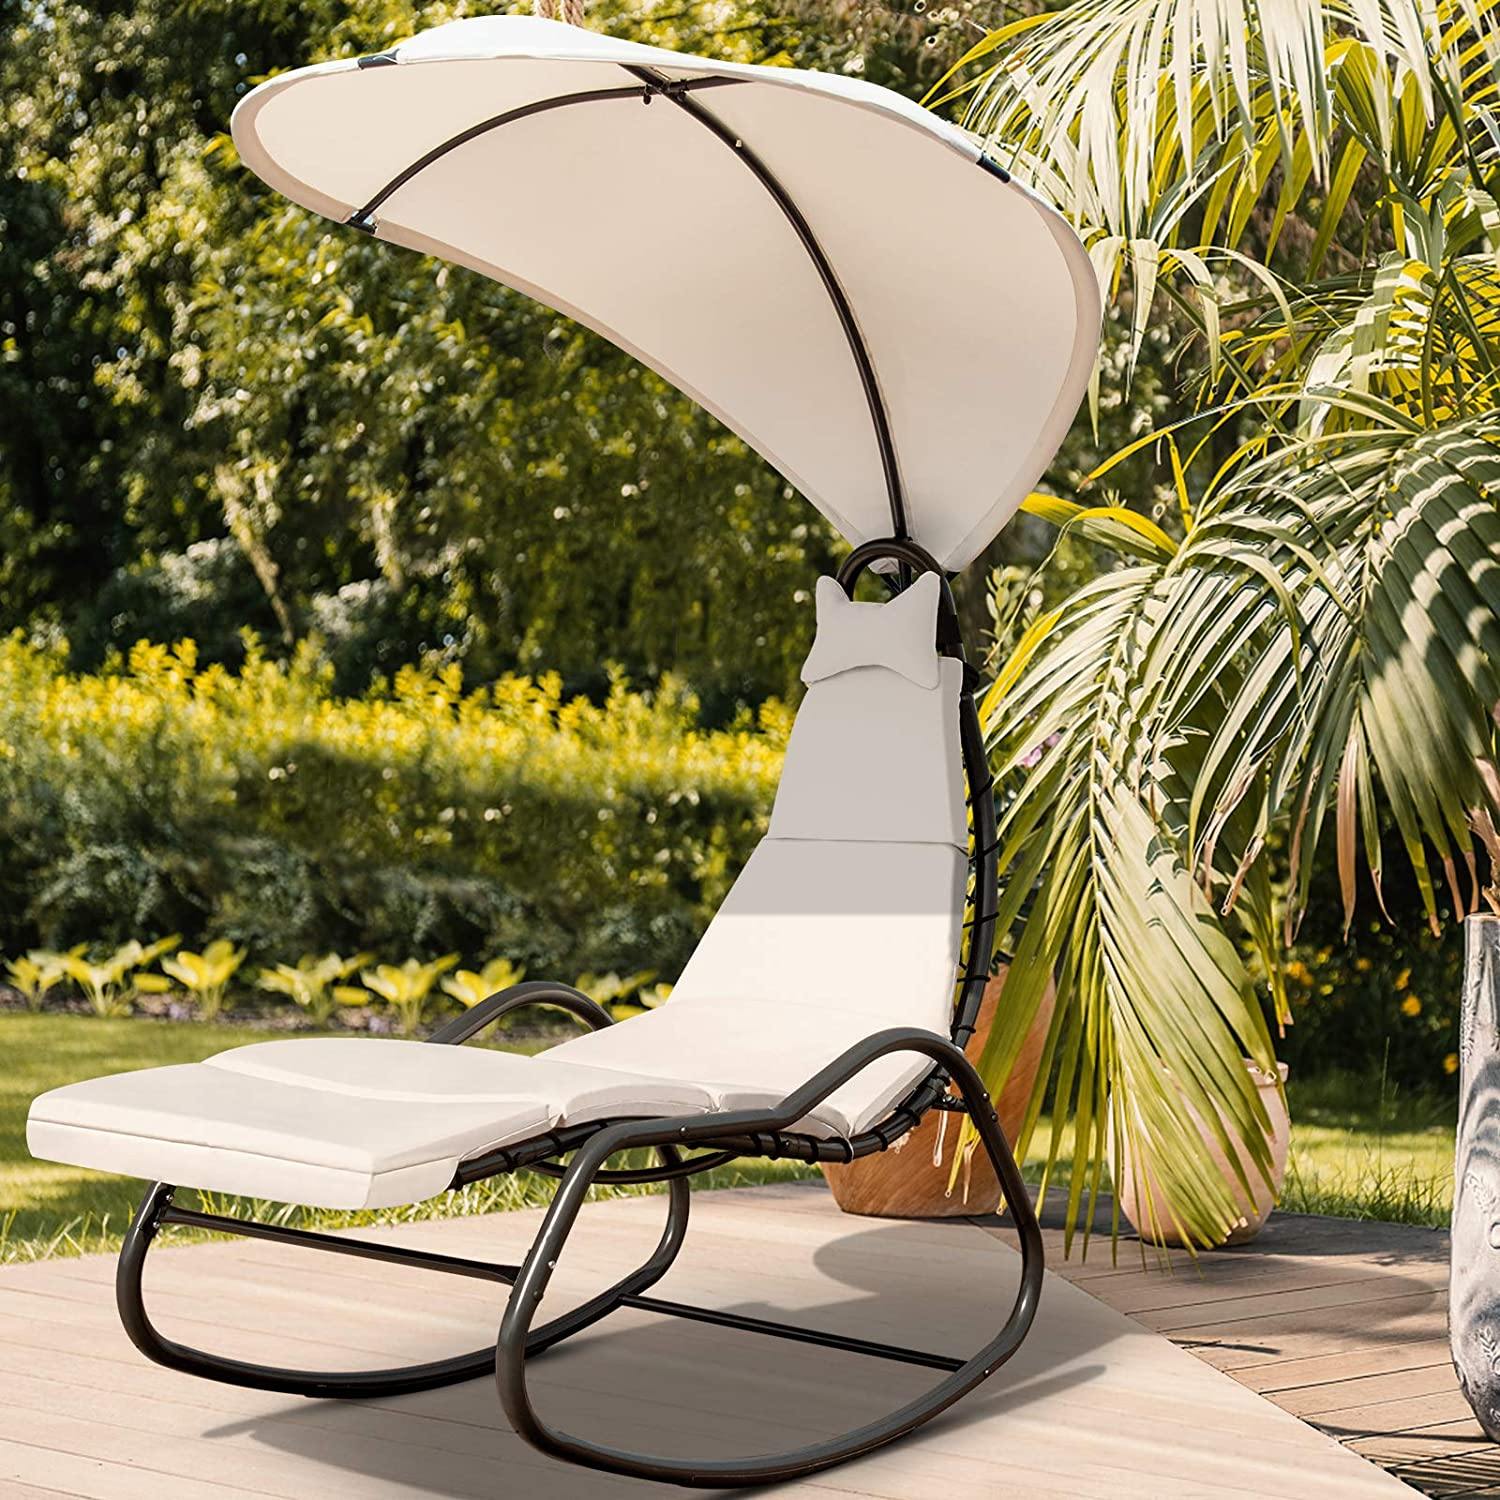 Chaise Lounge Swing Chair, Outdoor Hammock with Stand and Canopy - Giantexus